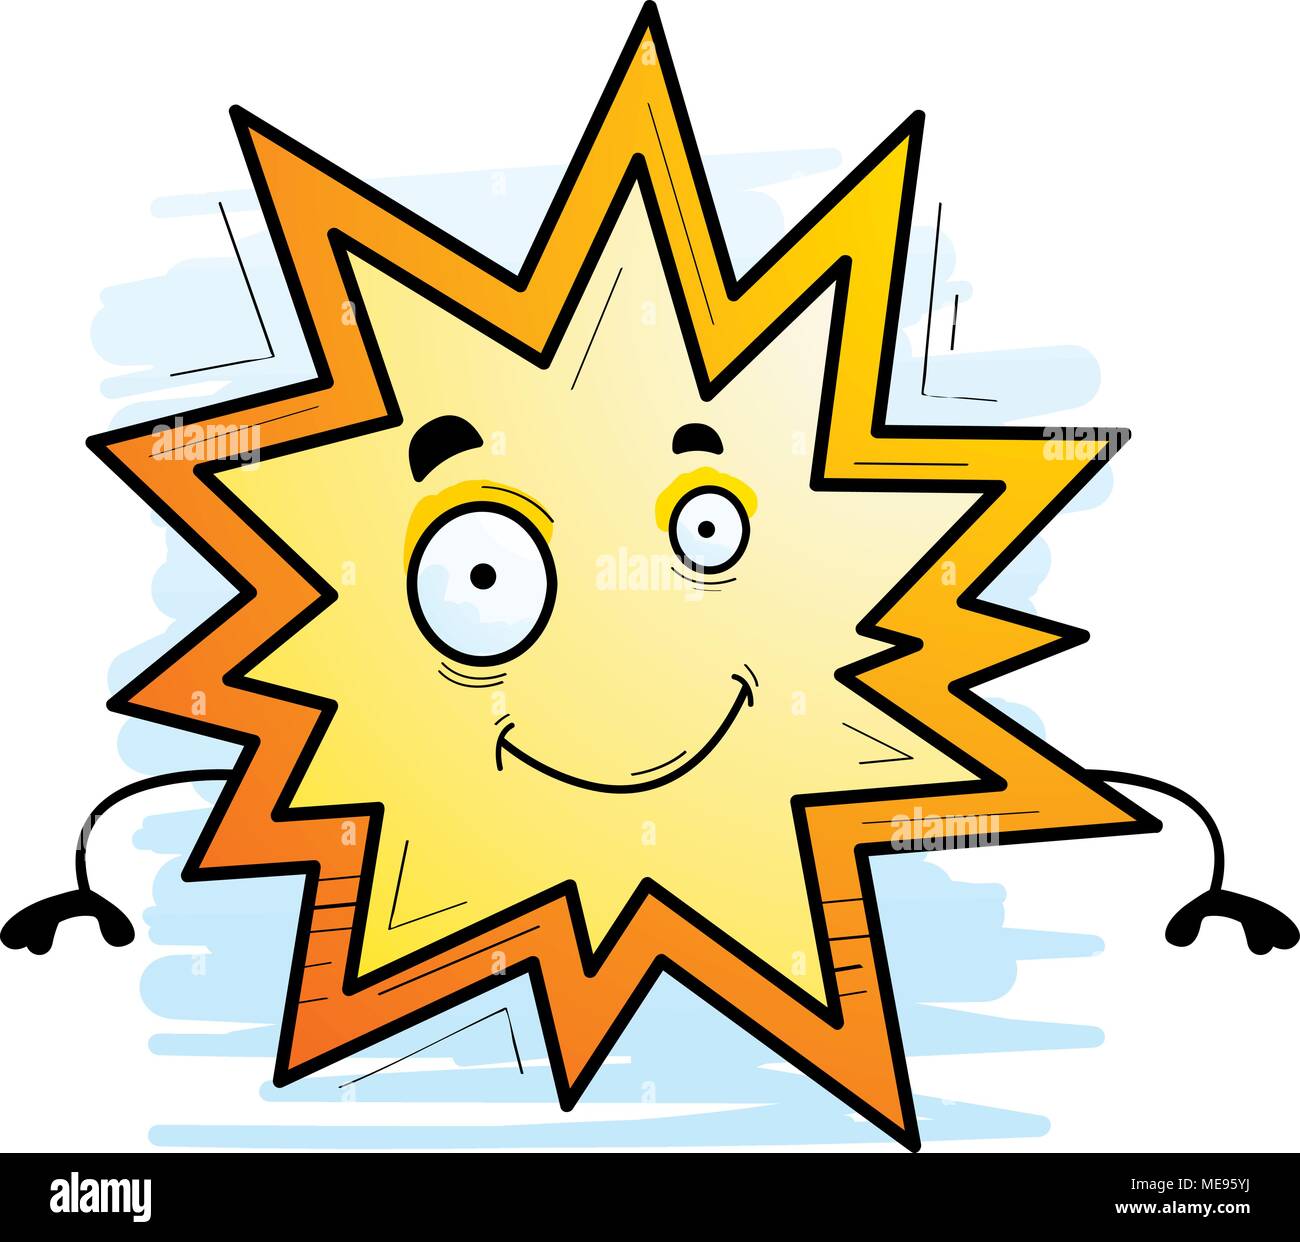 A cartoon illustration of an explosion smiling. Stock Vector